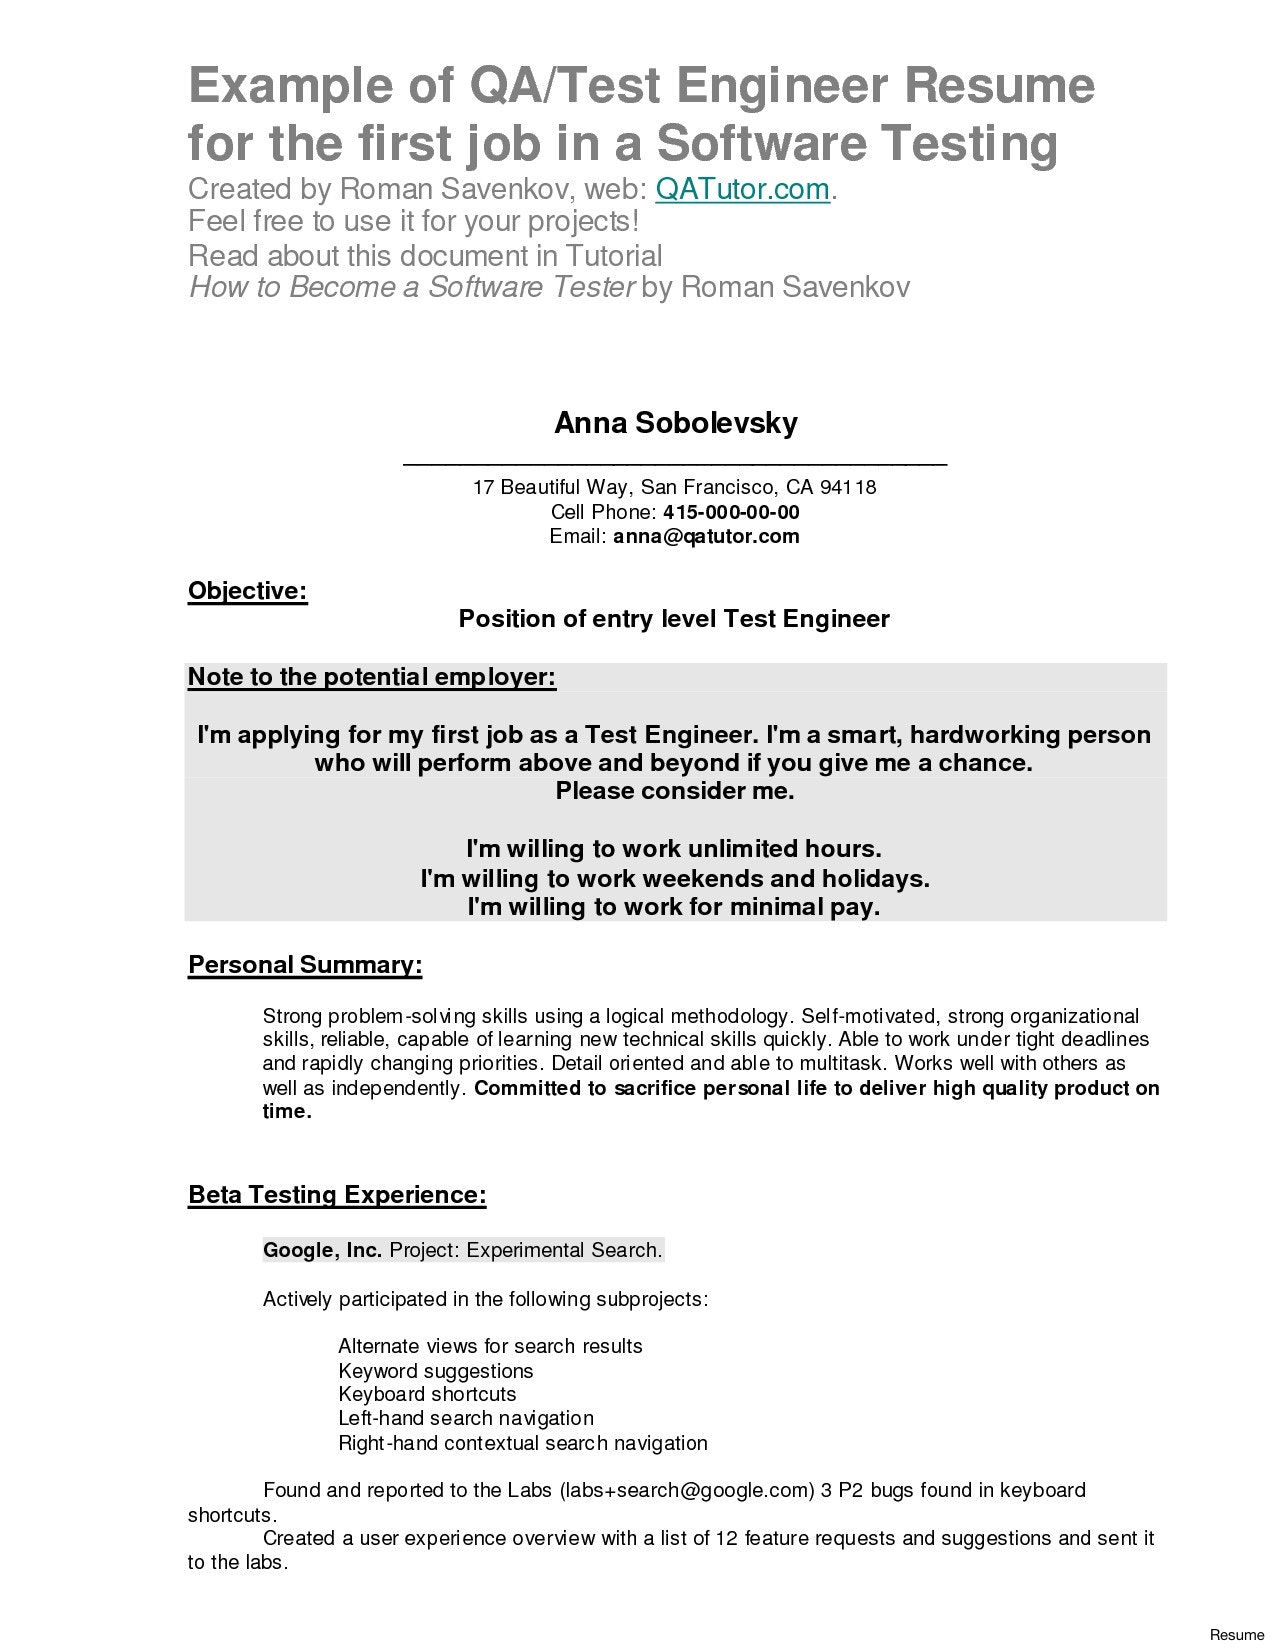 Resume Format After First Job 